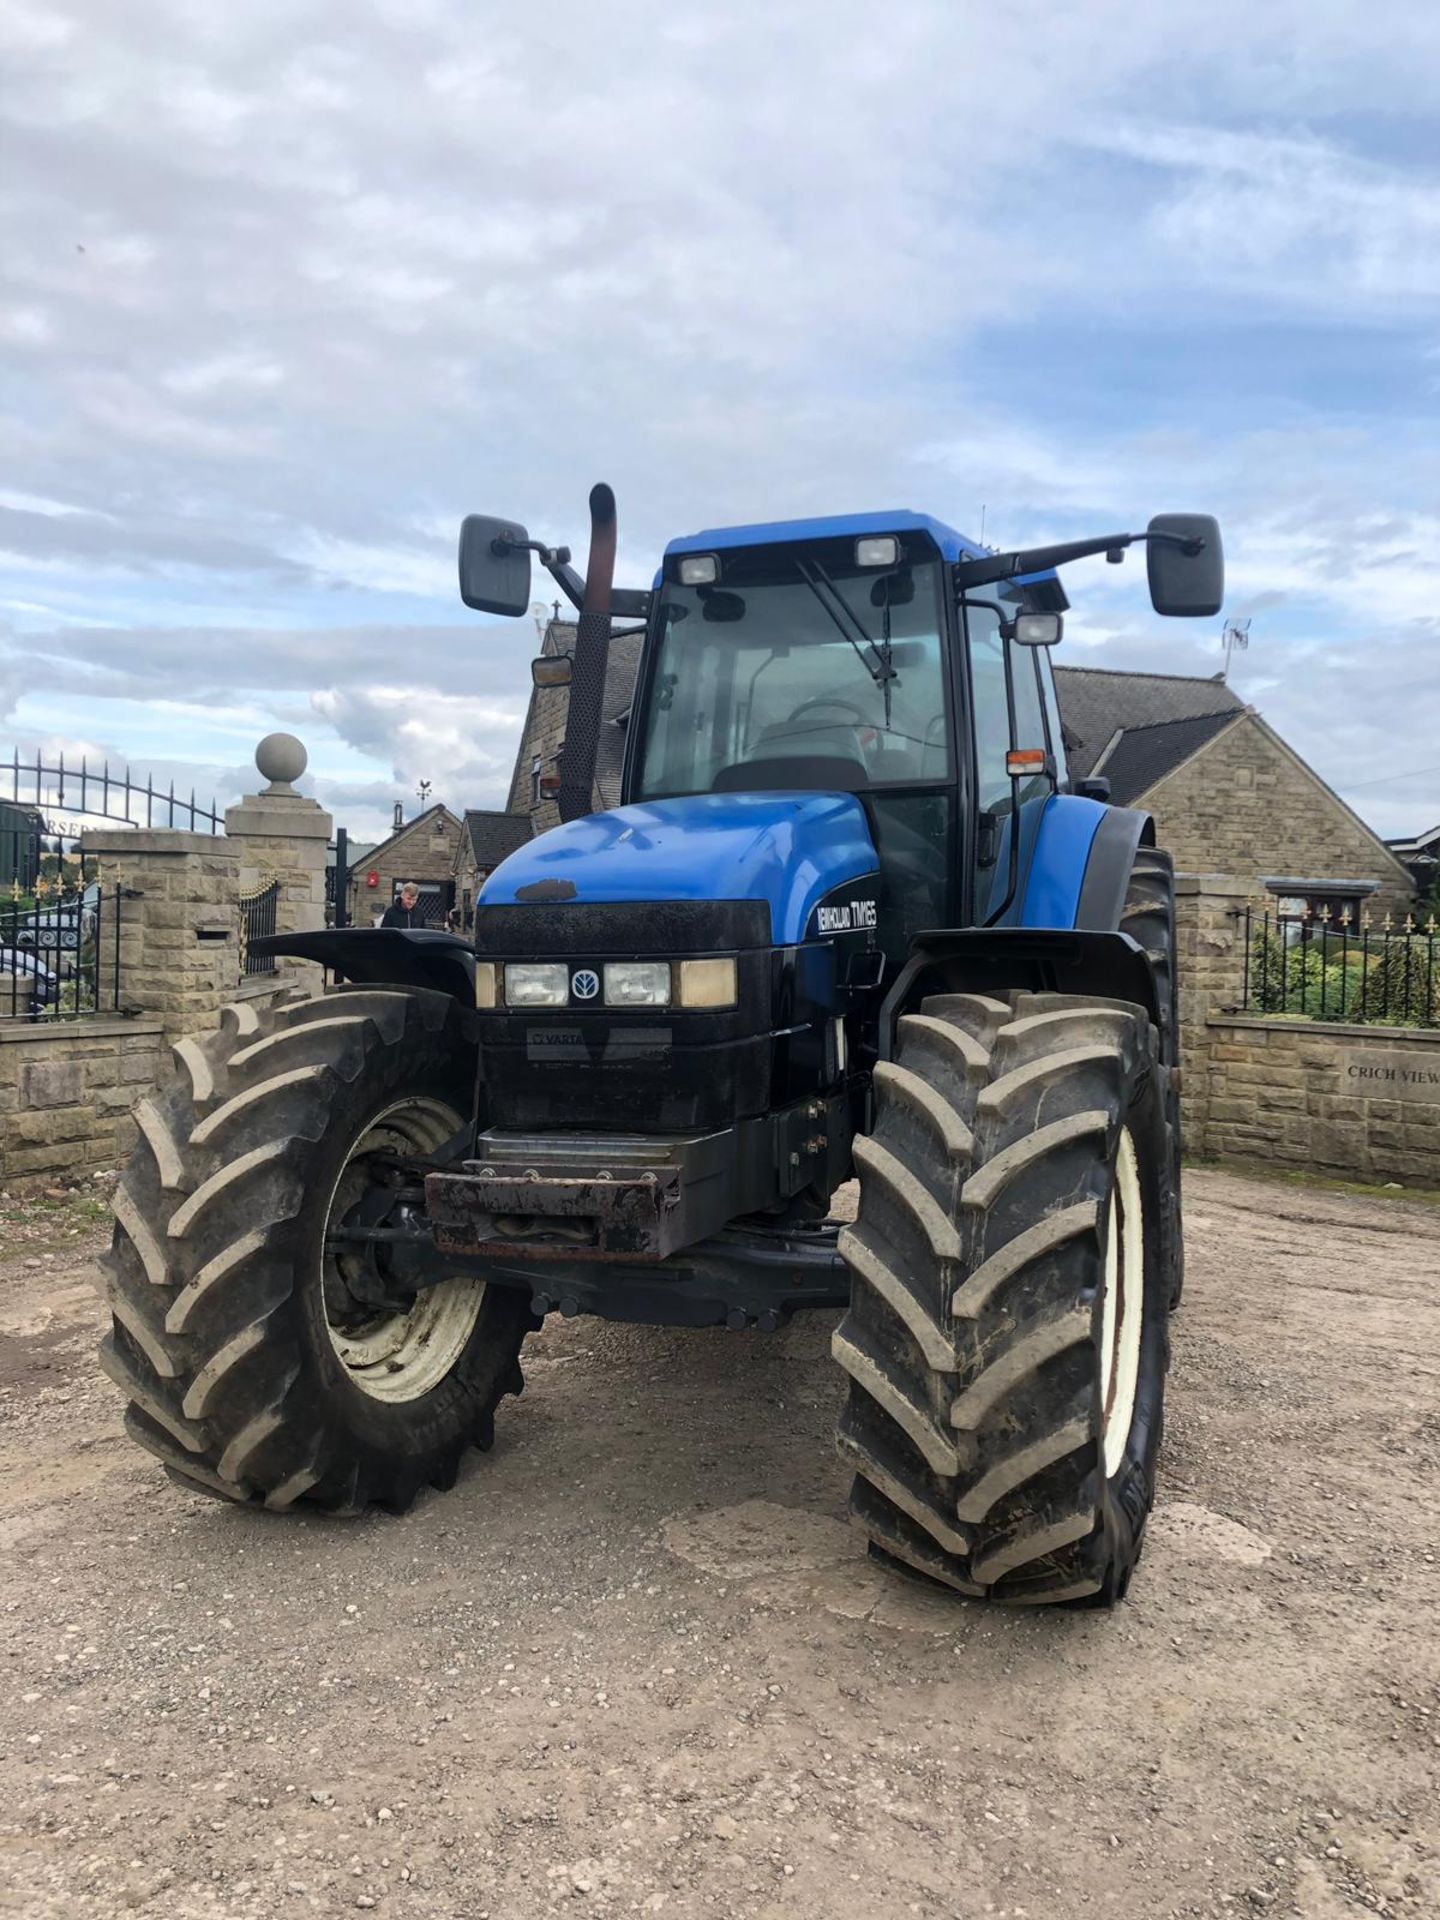 2001 NEWHOLLAND TM165 TRACTOR, CAB HEATER, 4 WHEEL DRIVE, POWER STEERING, DIFF LOCK, 50K GEARBOX - Image 2 of 7